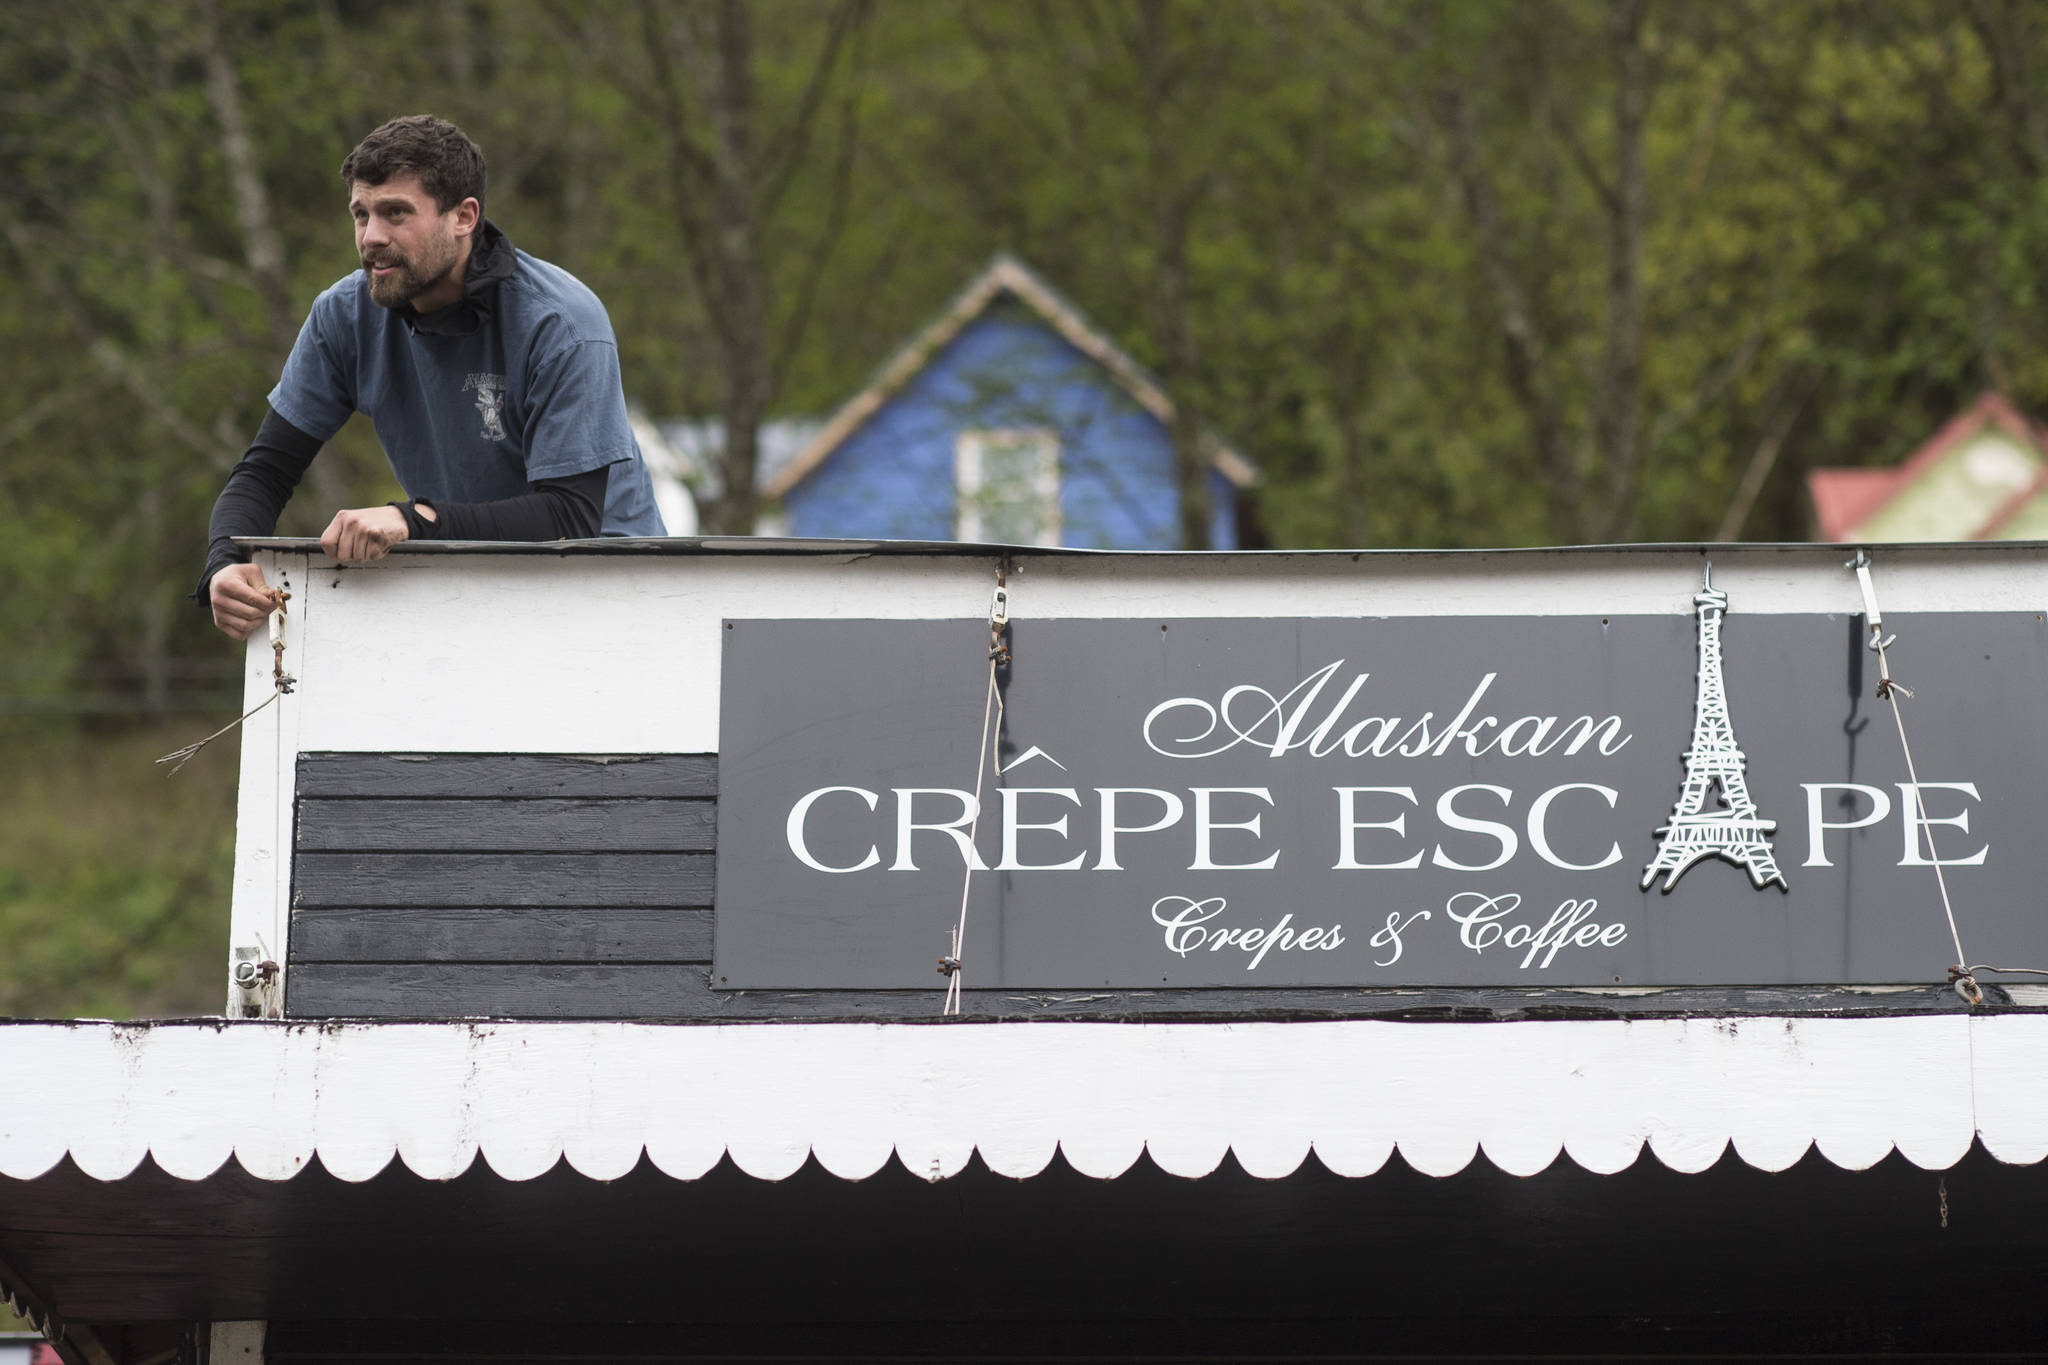 Dave McCasland, owner of Deckhand Dave’s Fish Tacos, sets up lights on food truck businesses being setup at Gunakedeit Park, also known as Pocket Park, on Thursday, May 9, 2019. The businesses are expected to be open by Monday. (Michael Penn | Juneau Empire)